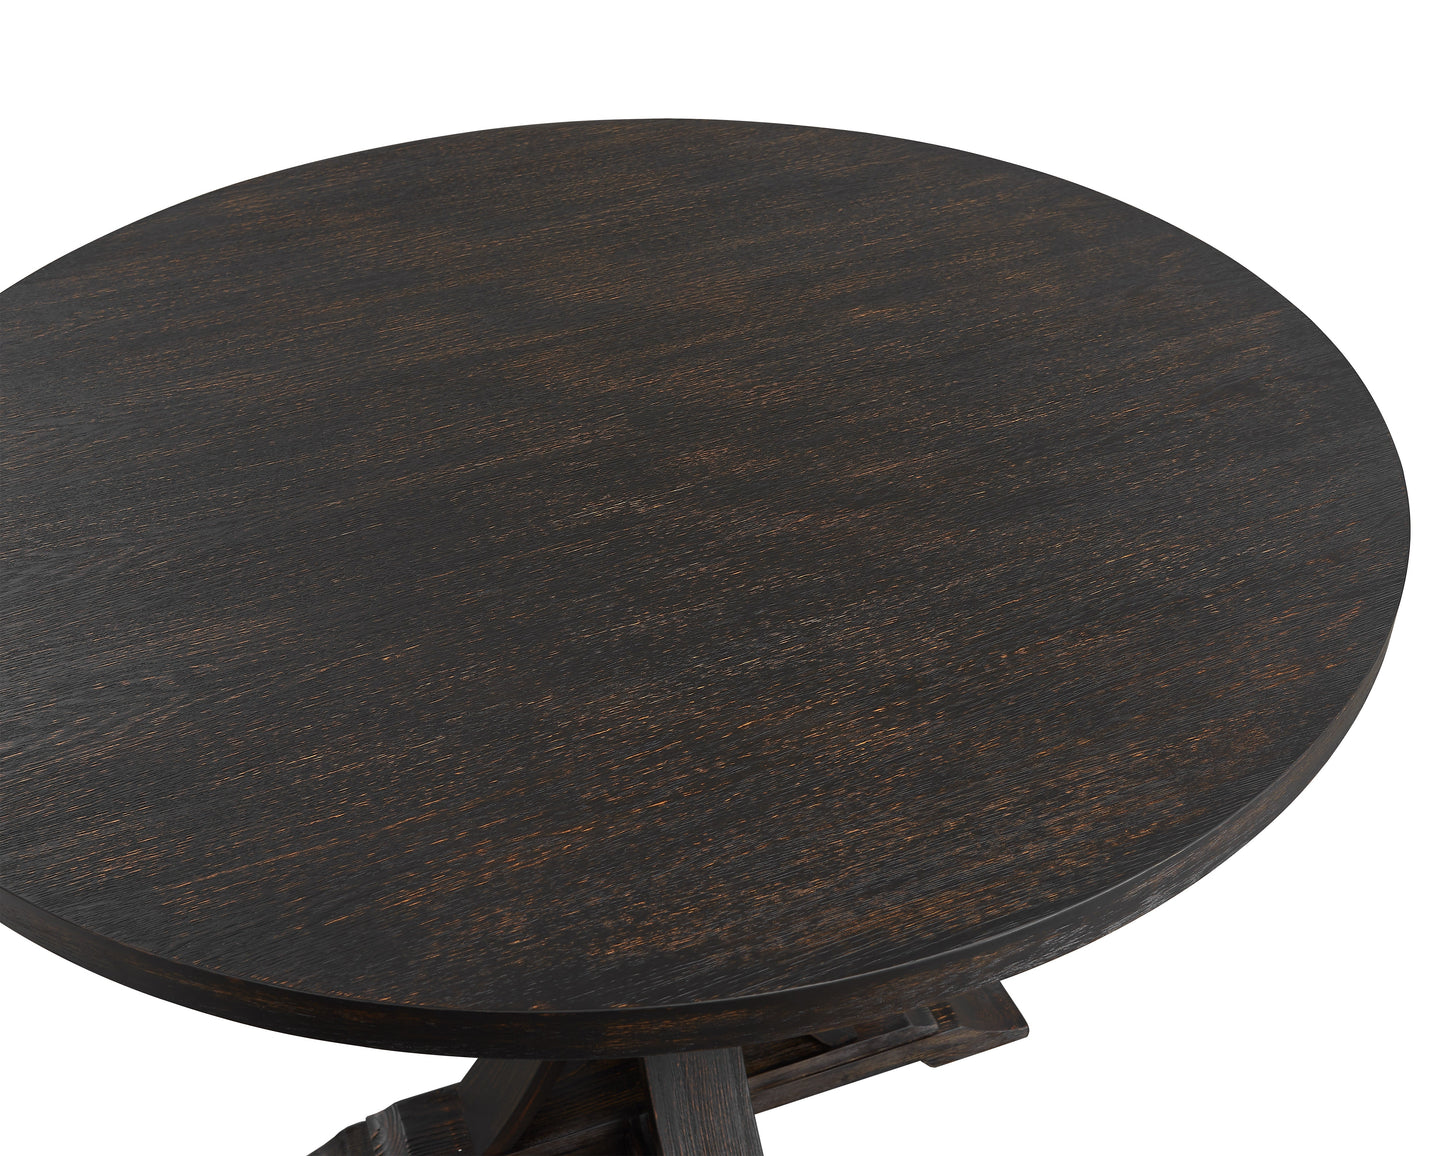 Distressed Black Finish Round Counter Height Pedestal Dining Table